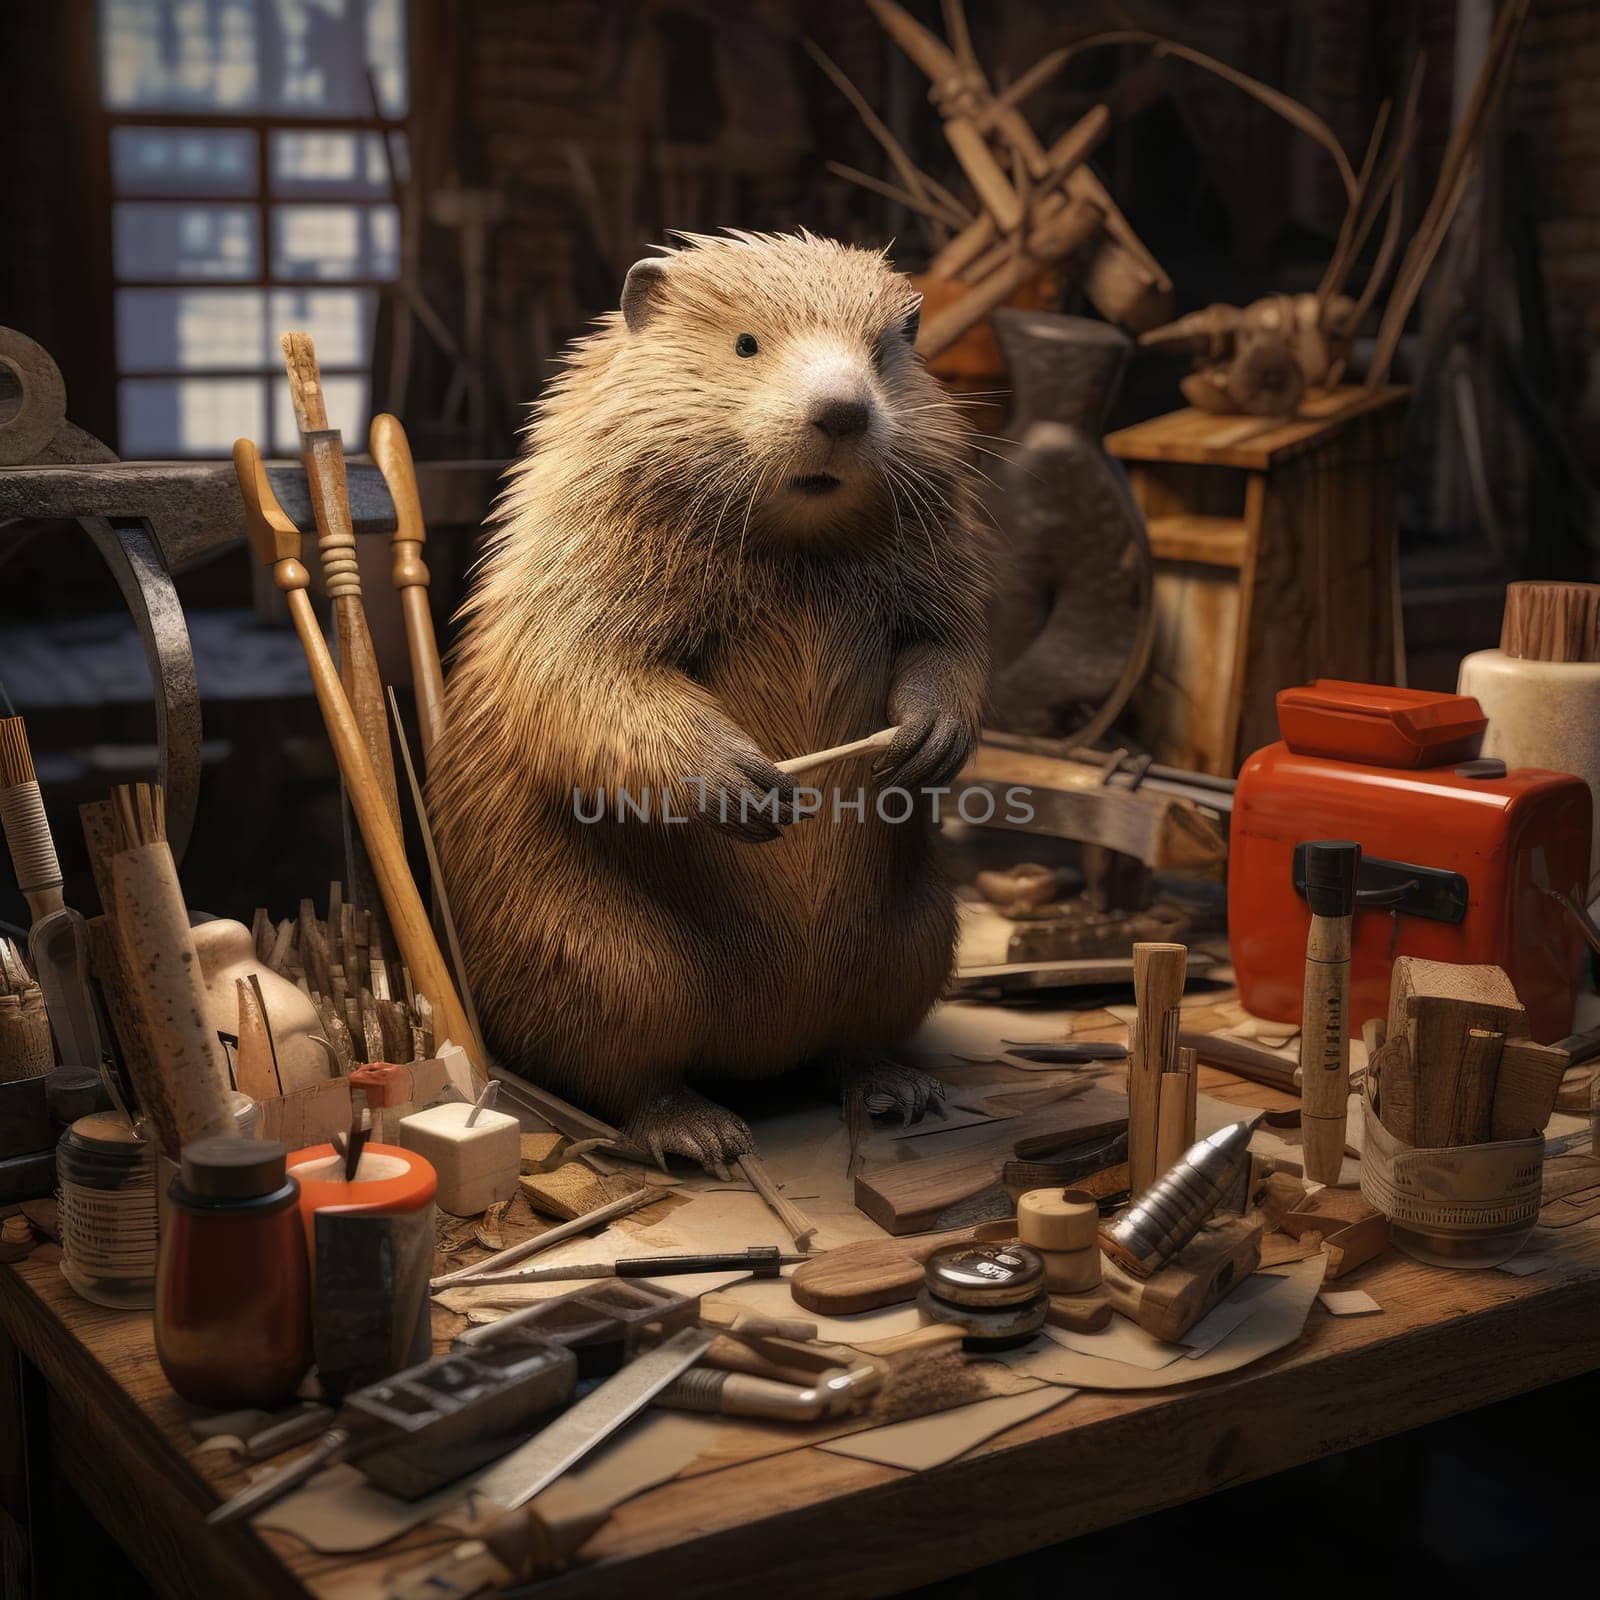 Beaver works as a craftsman in a furniture making workshop. Poster for furniture manufacturers